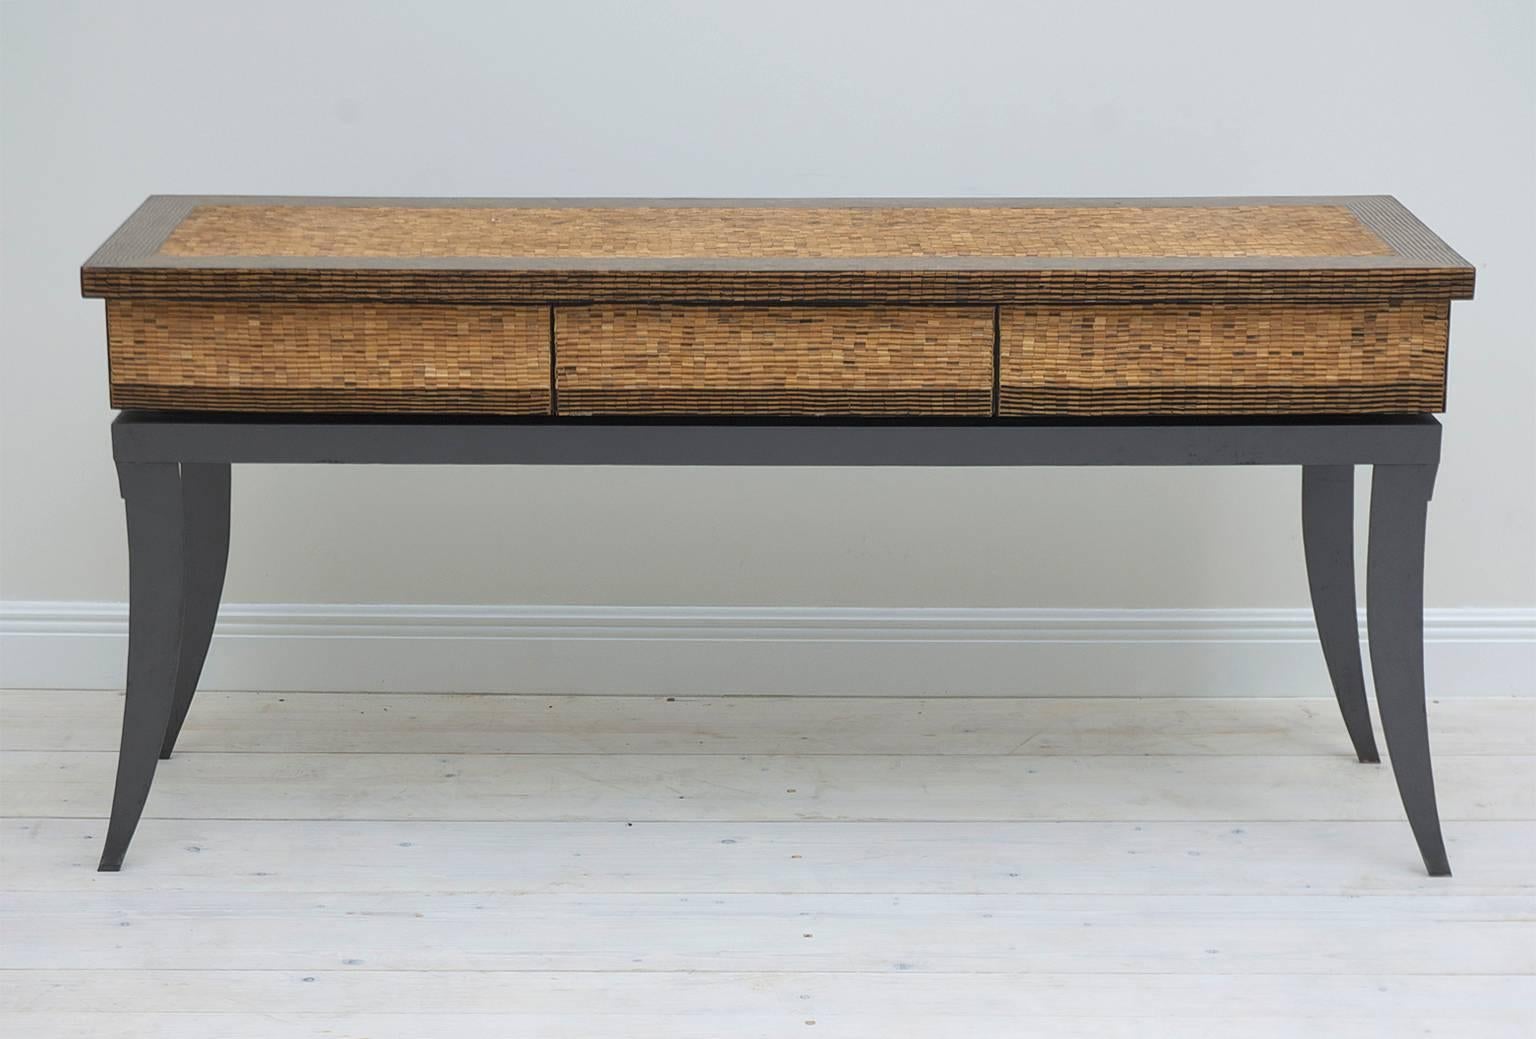 A very beautiful narrow table with sleek lines, featuring a finely inlaid top of split bamboo and palmwood, resting on anodized steel base with saber legs, and offering three drawers. Thailand.
A handsome sideboard, entrance or sofa